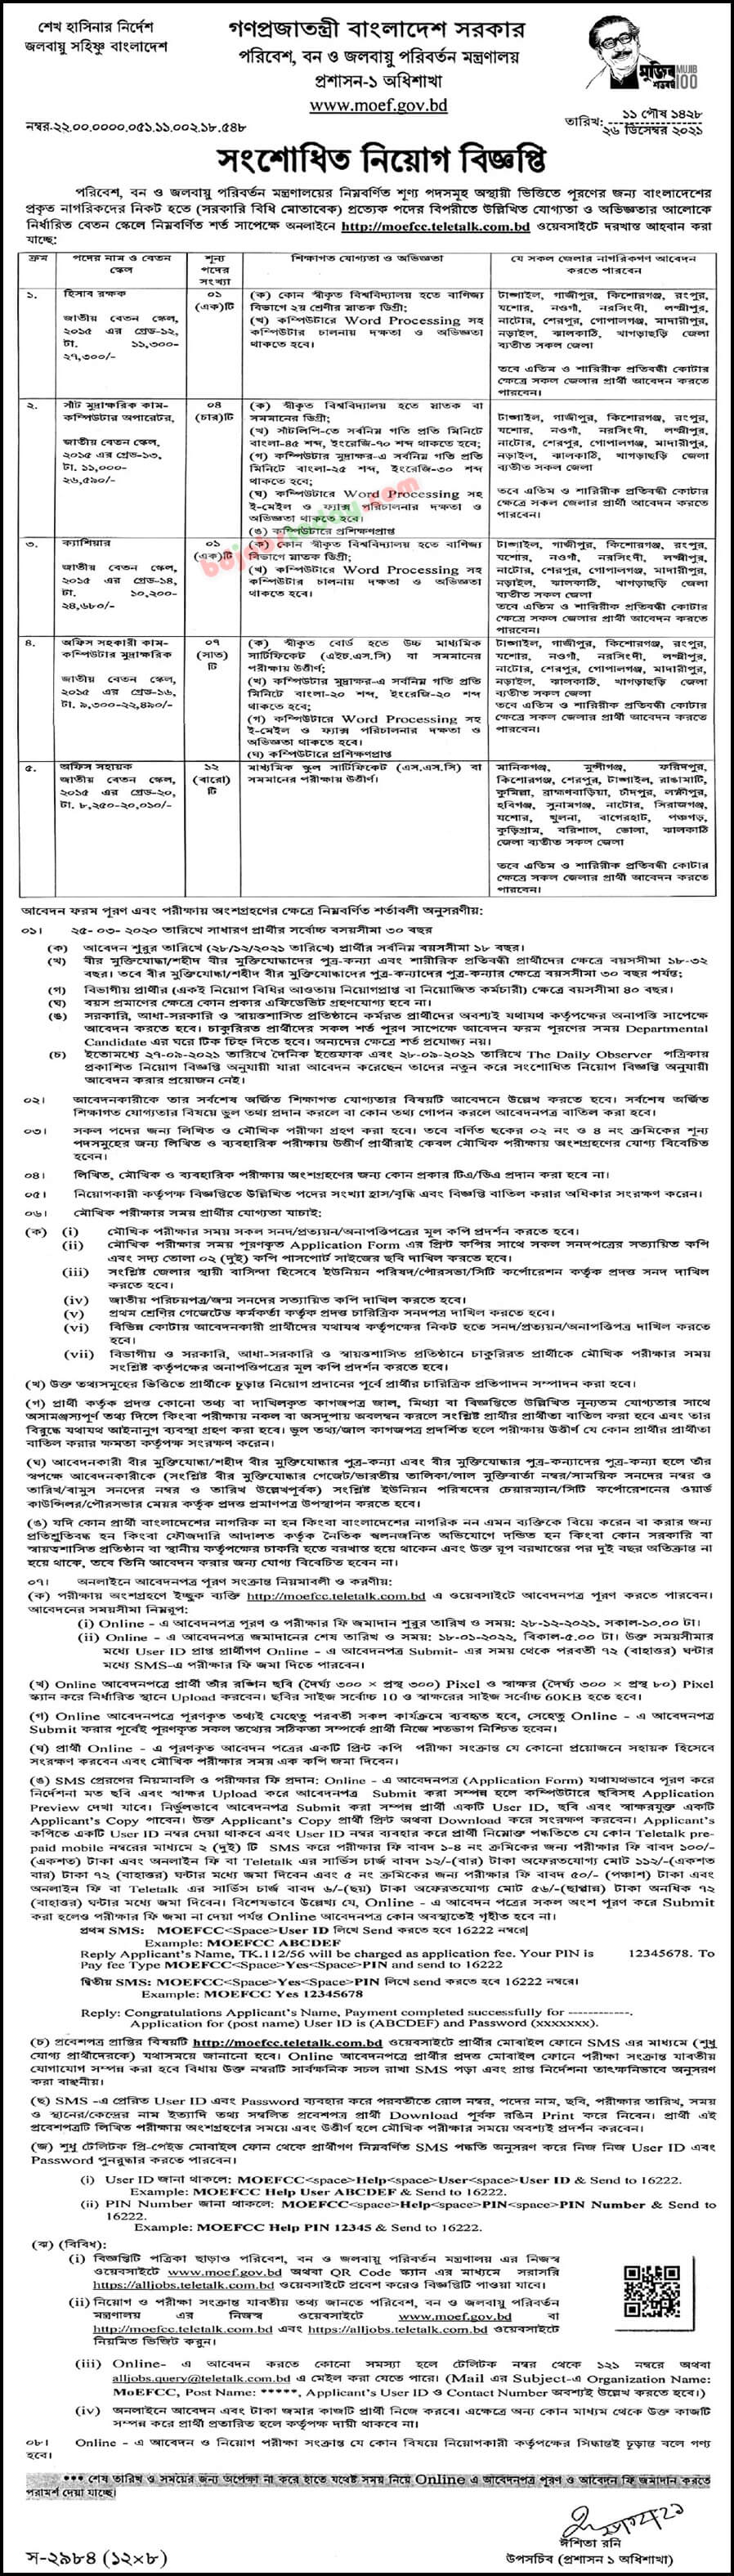 Ministry of Environment and Forests Job Circular image 2022 